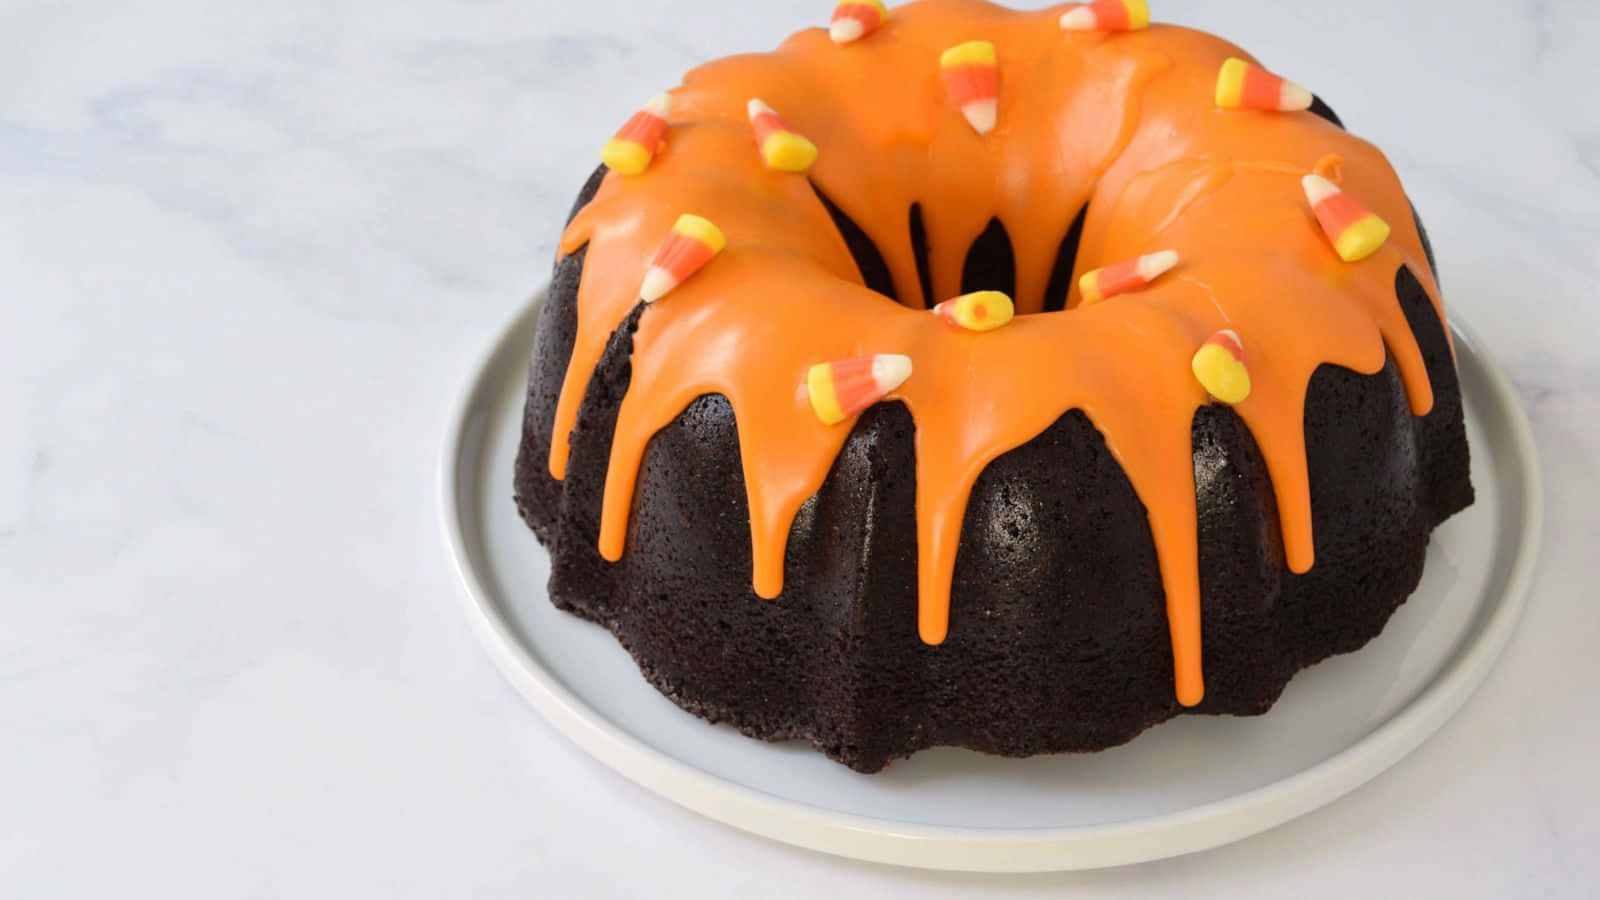 Trick or Treat! This delicious Halloween-themed cake is the perfect treat for a spooky night Wallpaper